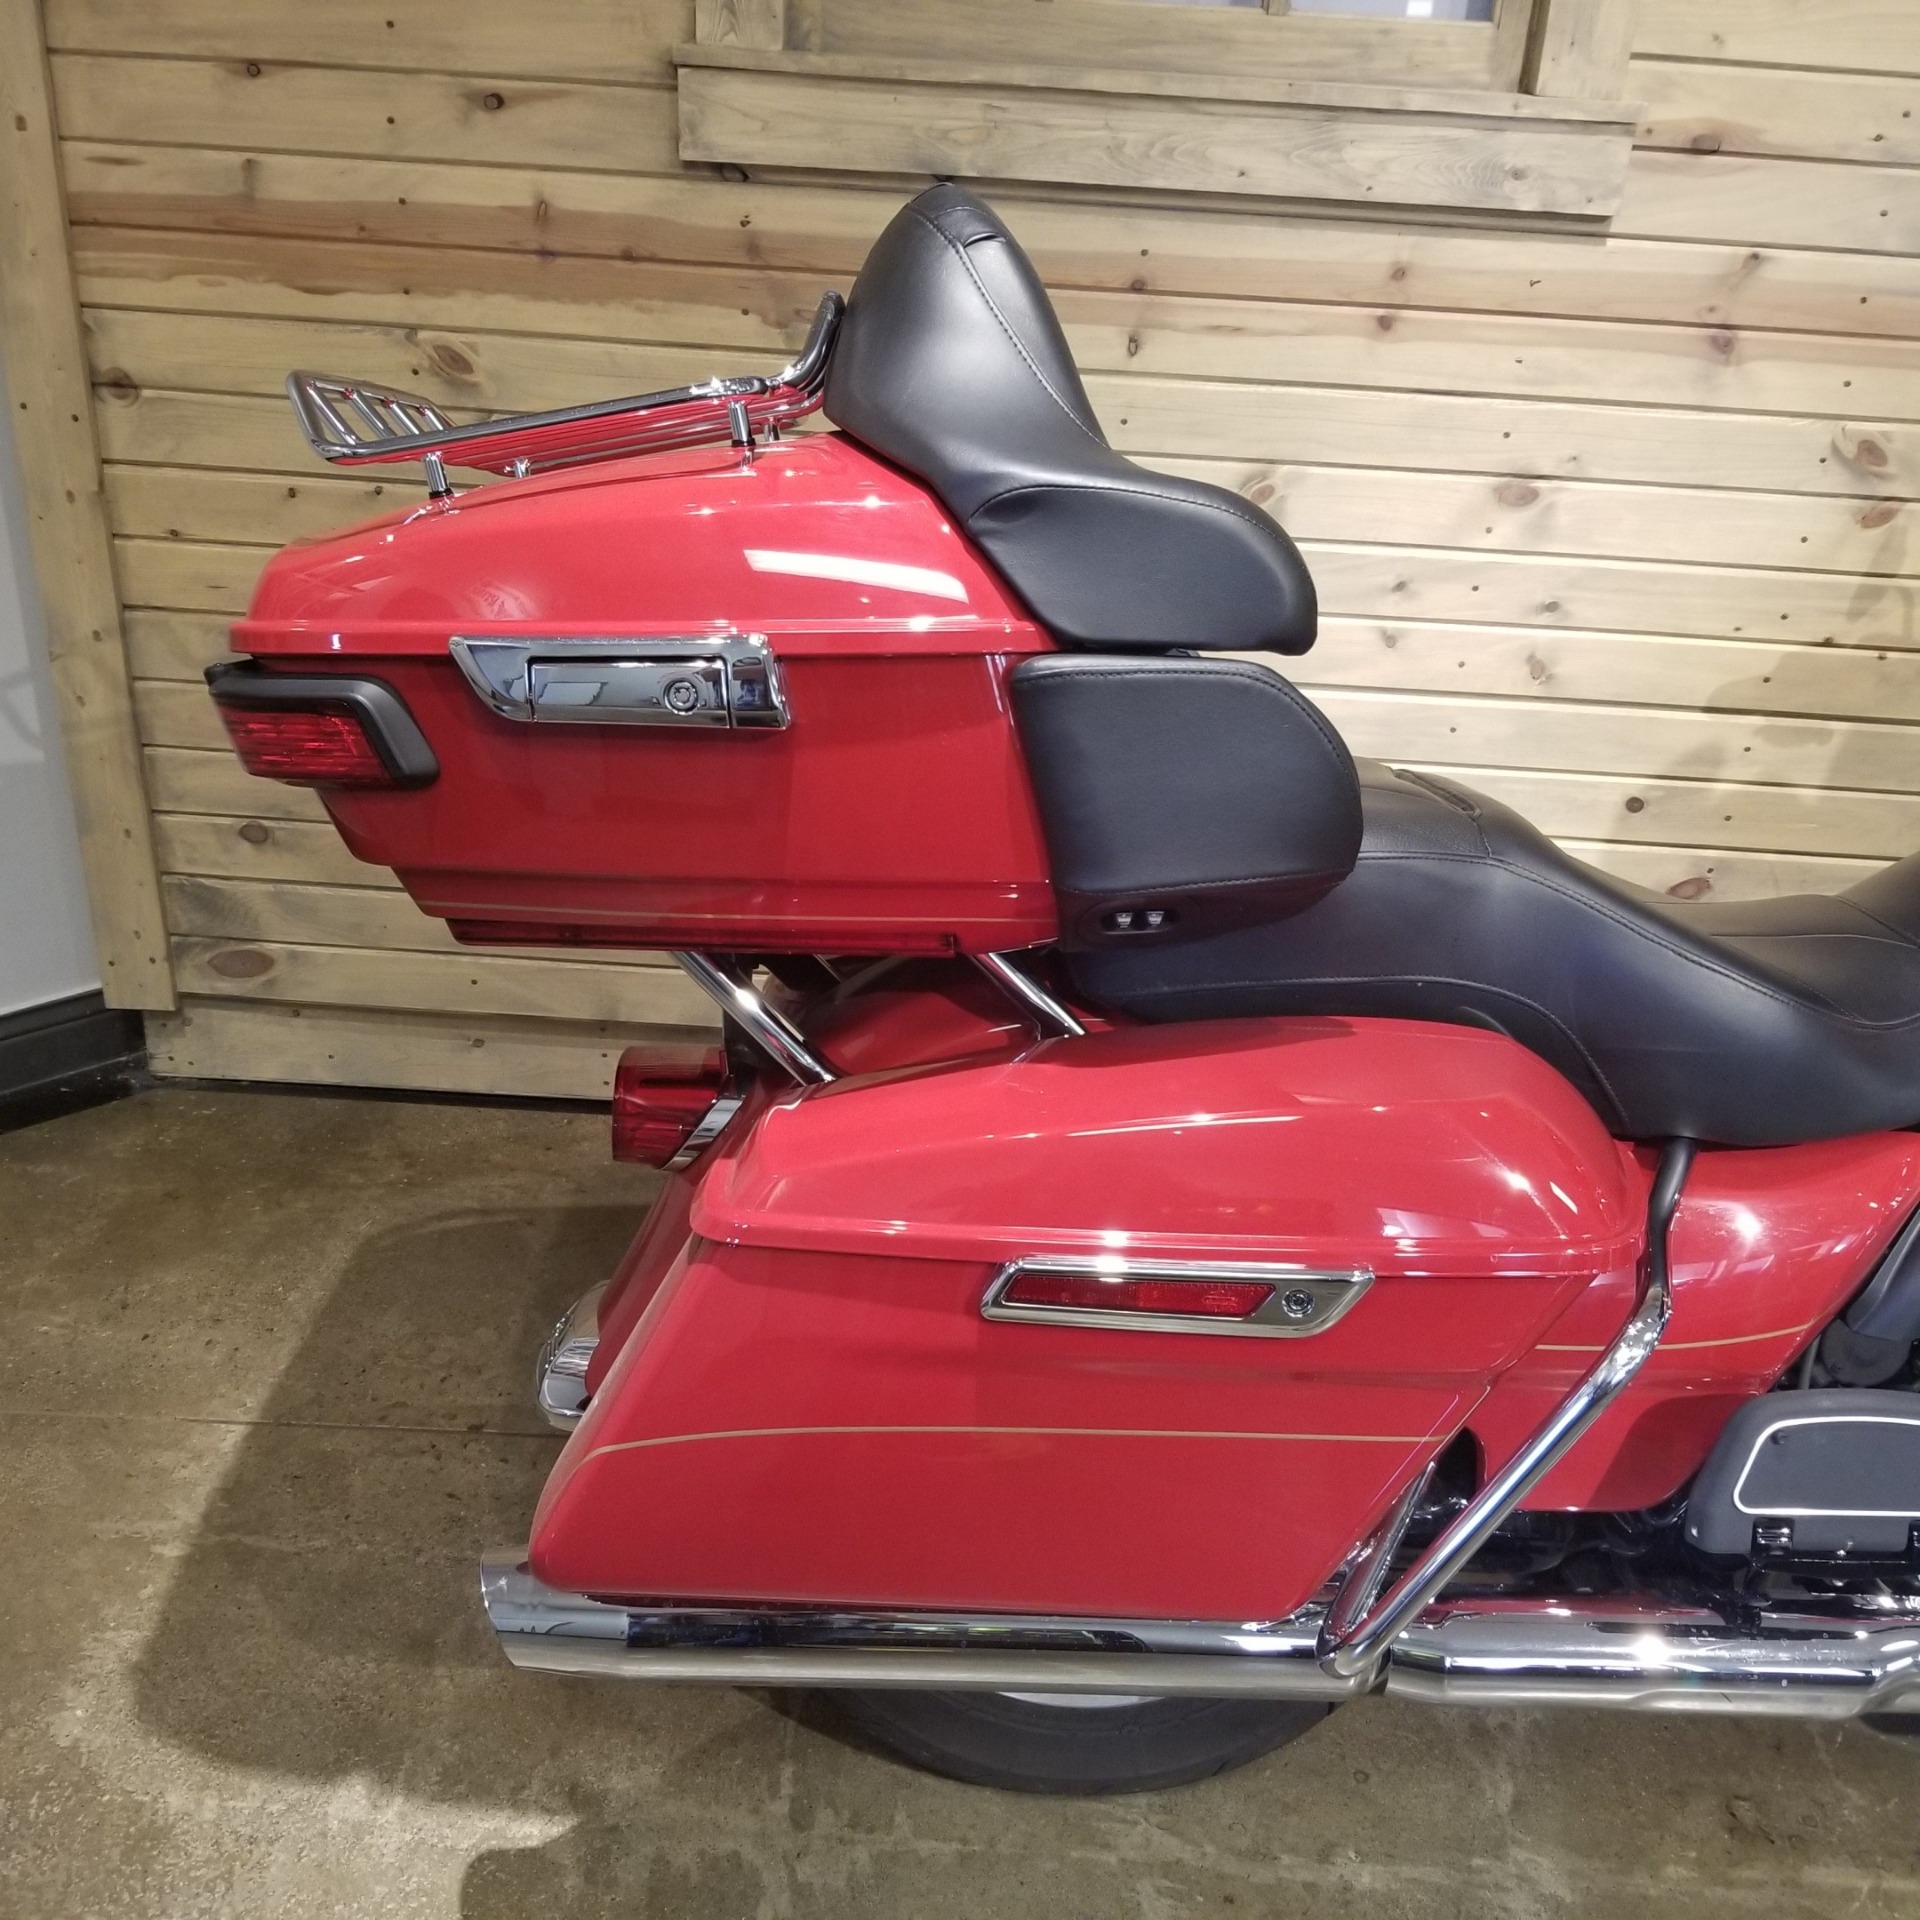 2019 Harley-Davidson Ultra Limited in Mentor, Ohio - Photo 4